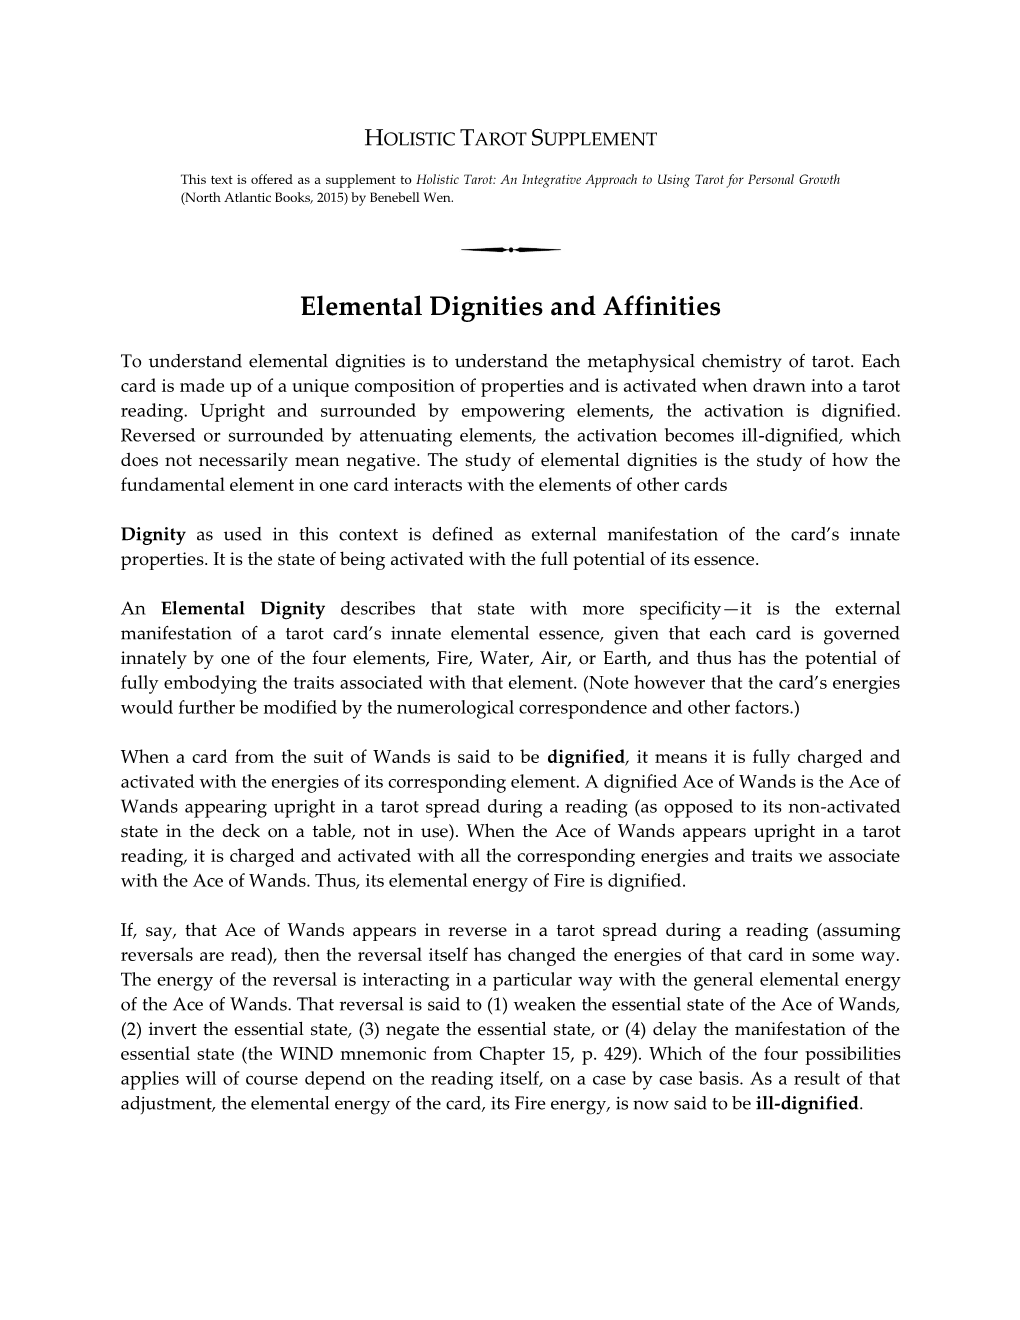 Elemental Dignities and Affinities